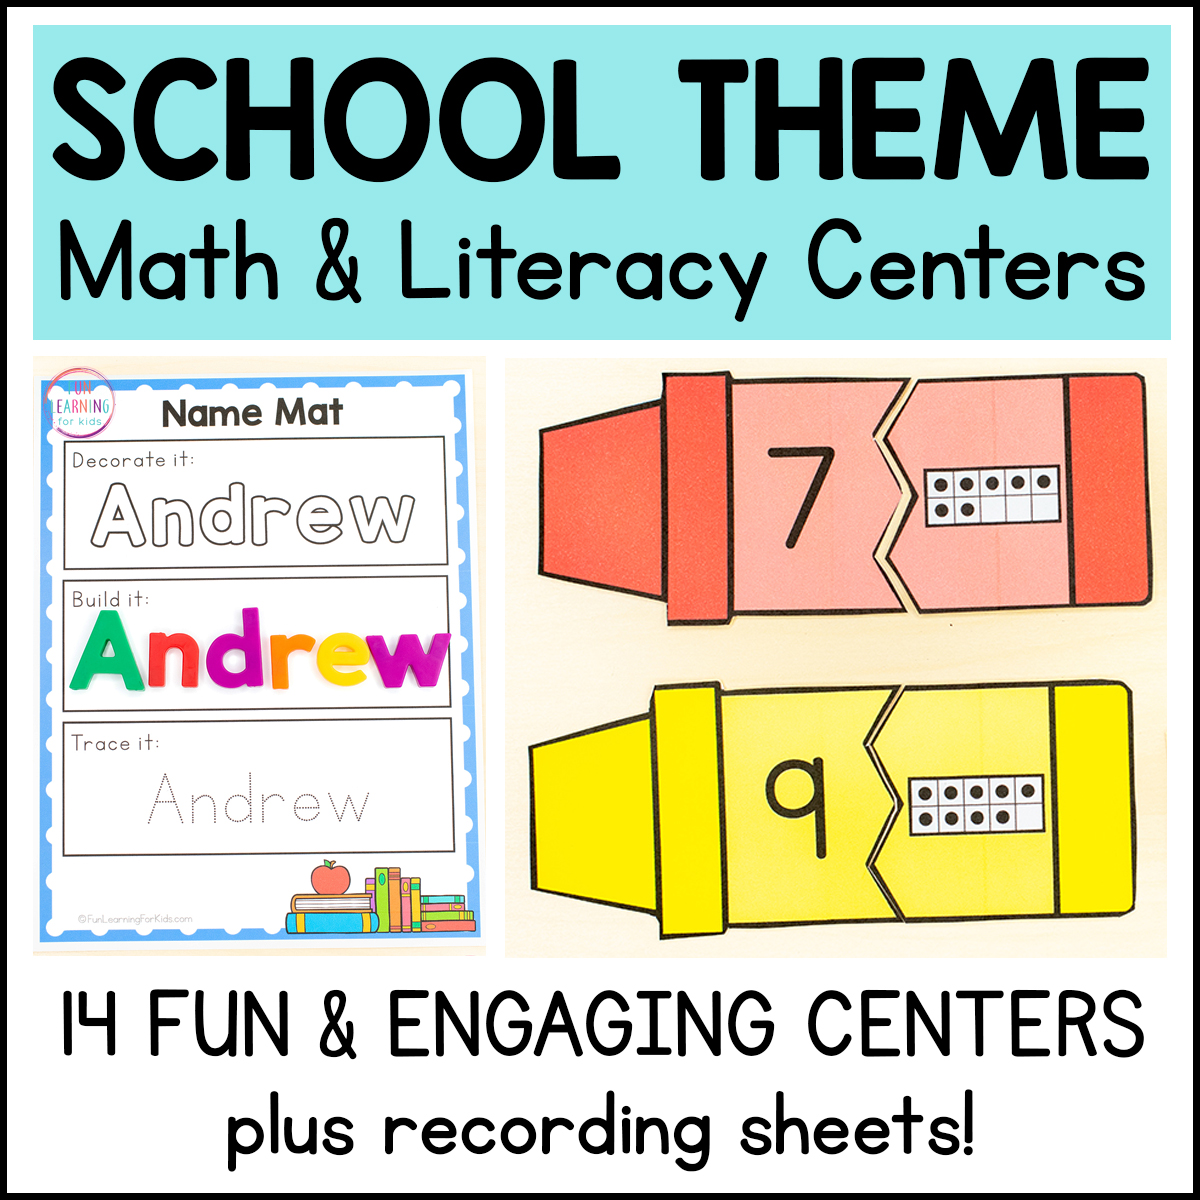 Back to school theme math and literacy centers for kids in preschool, pre-k and kindergarten.